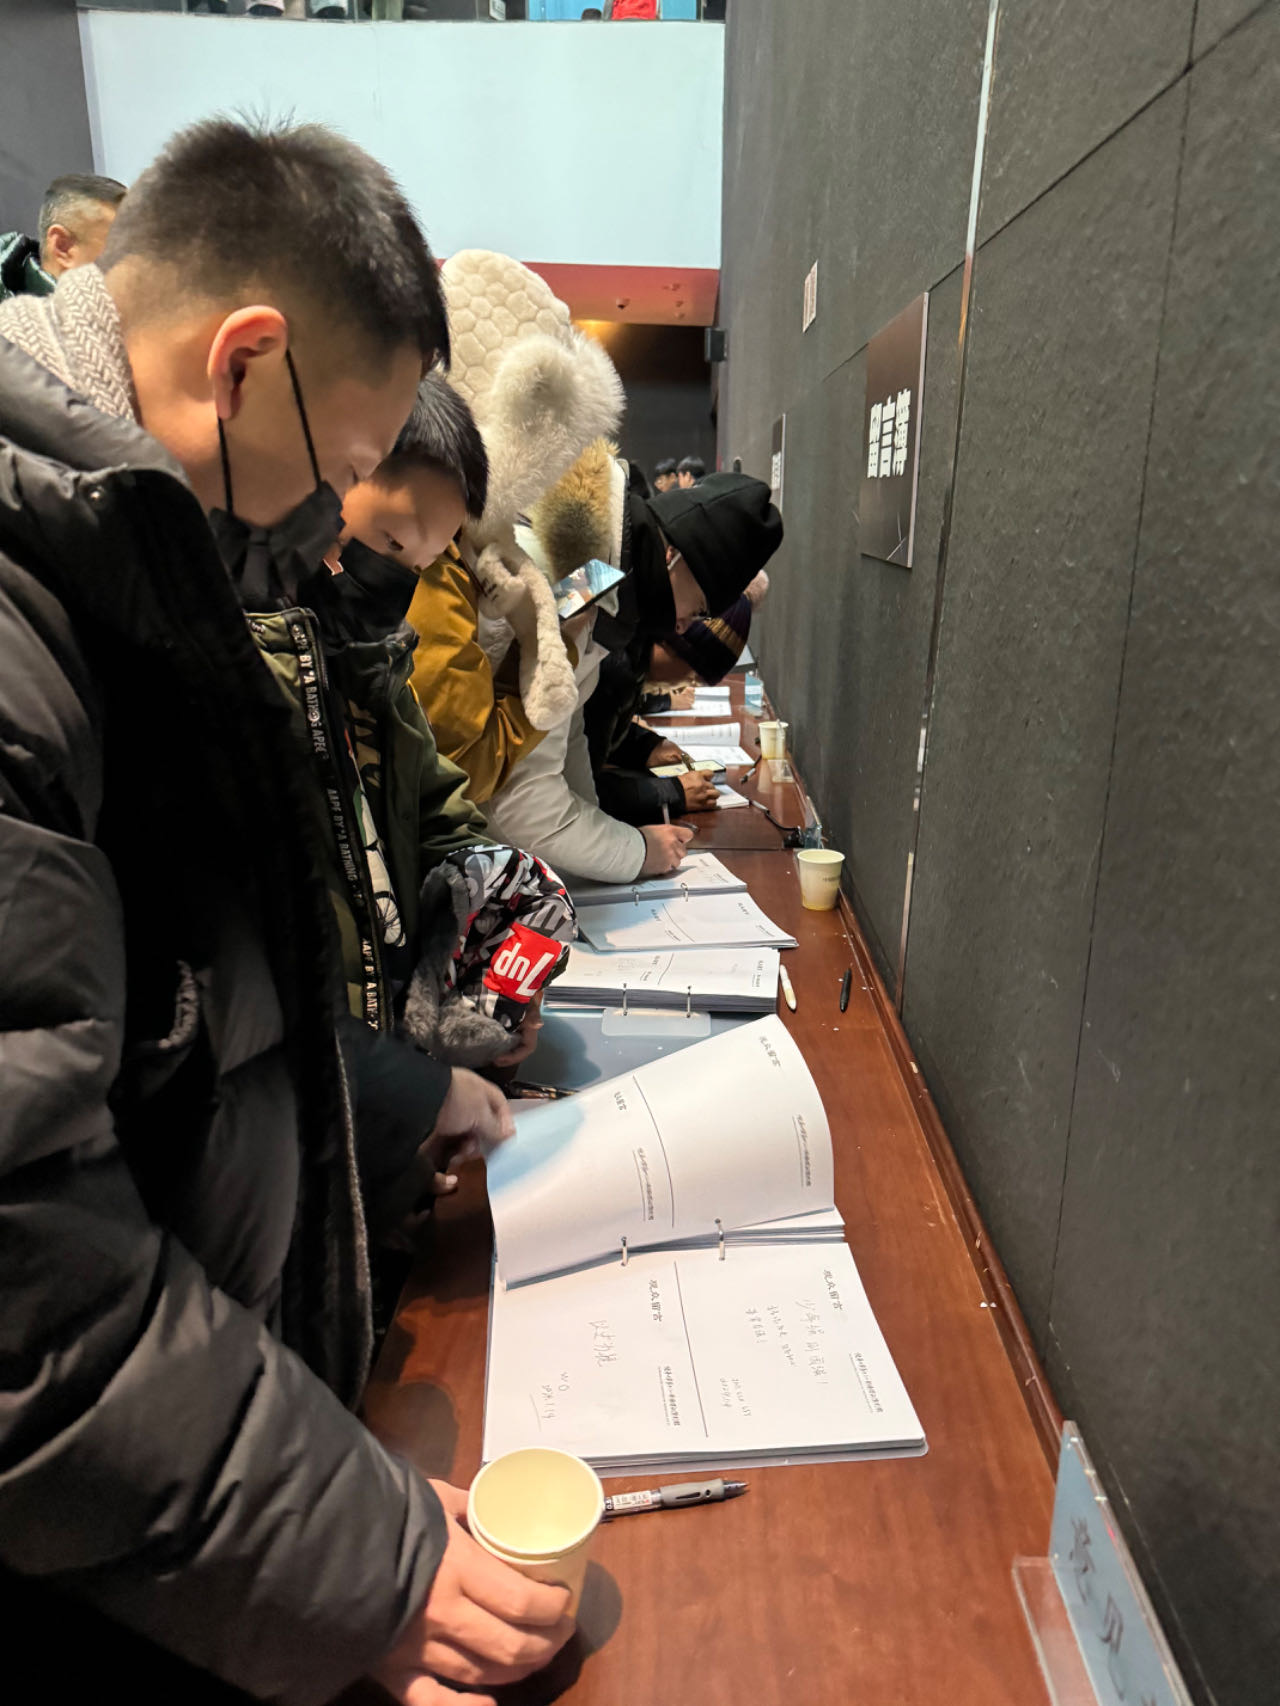 Visitors leave messages on booklets at the Museum of Evidence of War Crimes by the Japanese Army Unit 731 in Harbin, Northeast China's Heilongjiang Province on January 14, 2024. Photo: Bi Mengying/GT